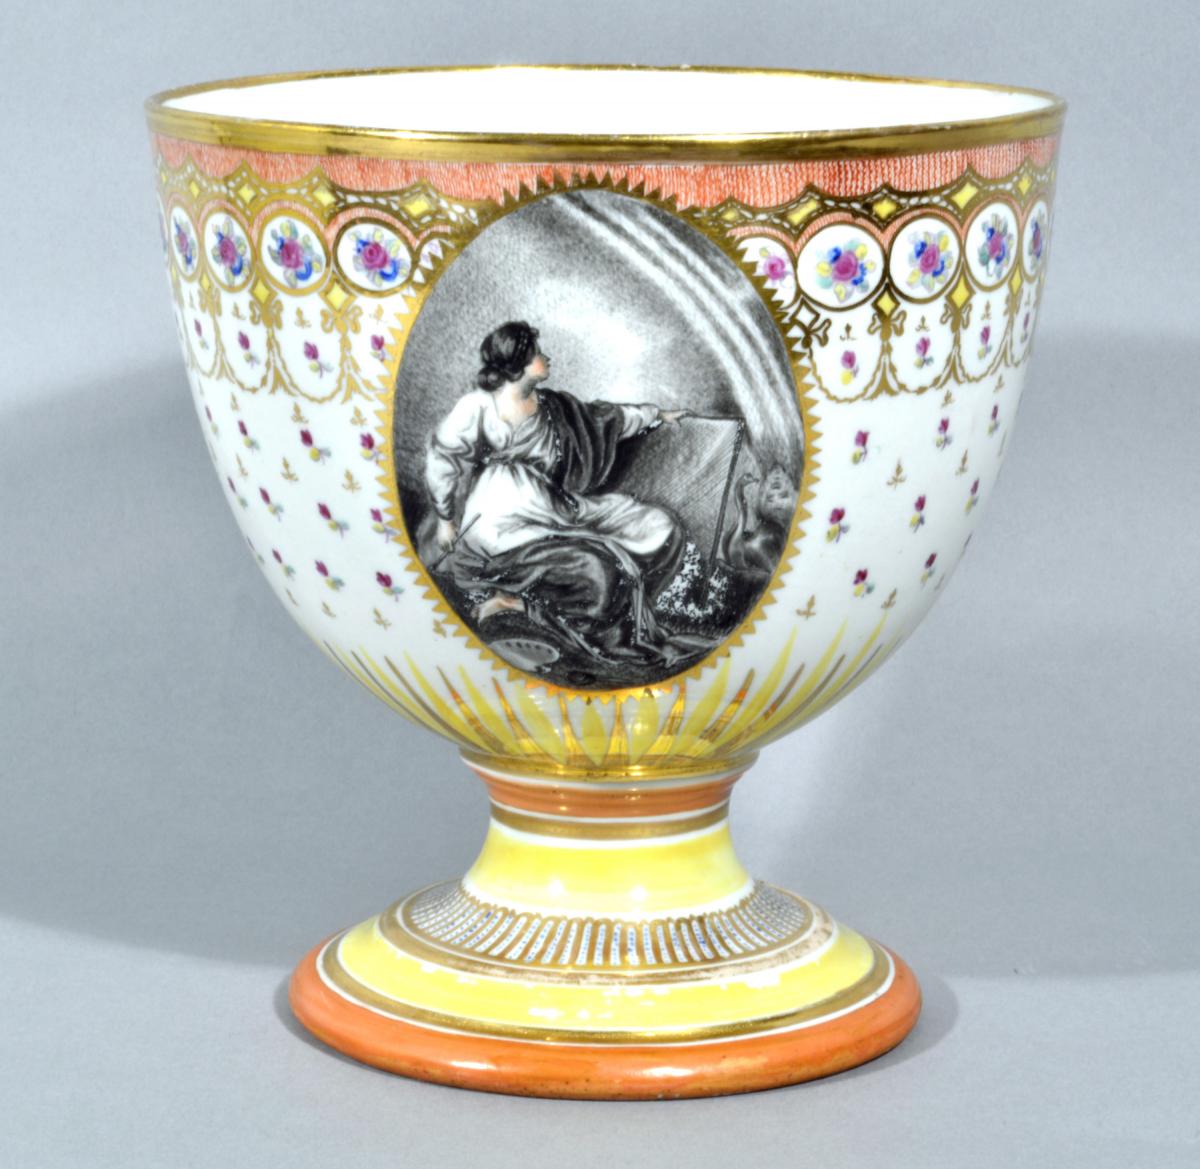 Antique English Chamberlain Worcester Large Porcelain Goblet with Painting by Humphrey Chamberlain after Angelica Kauffman's Pai